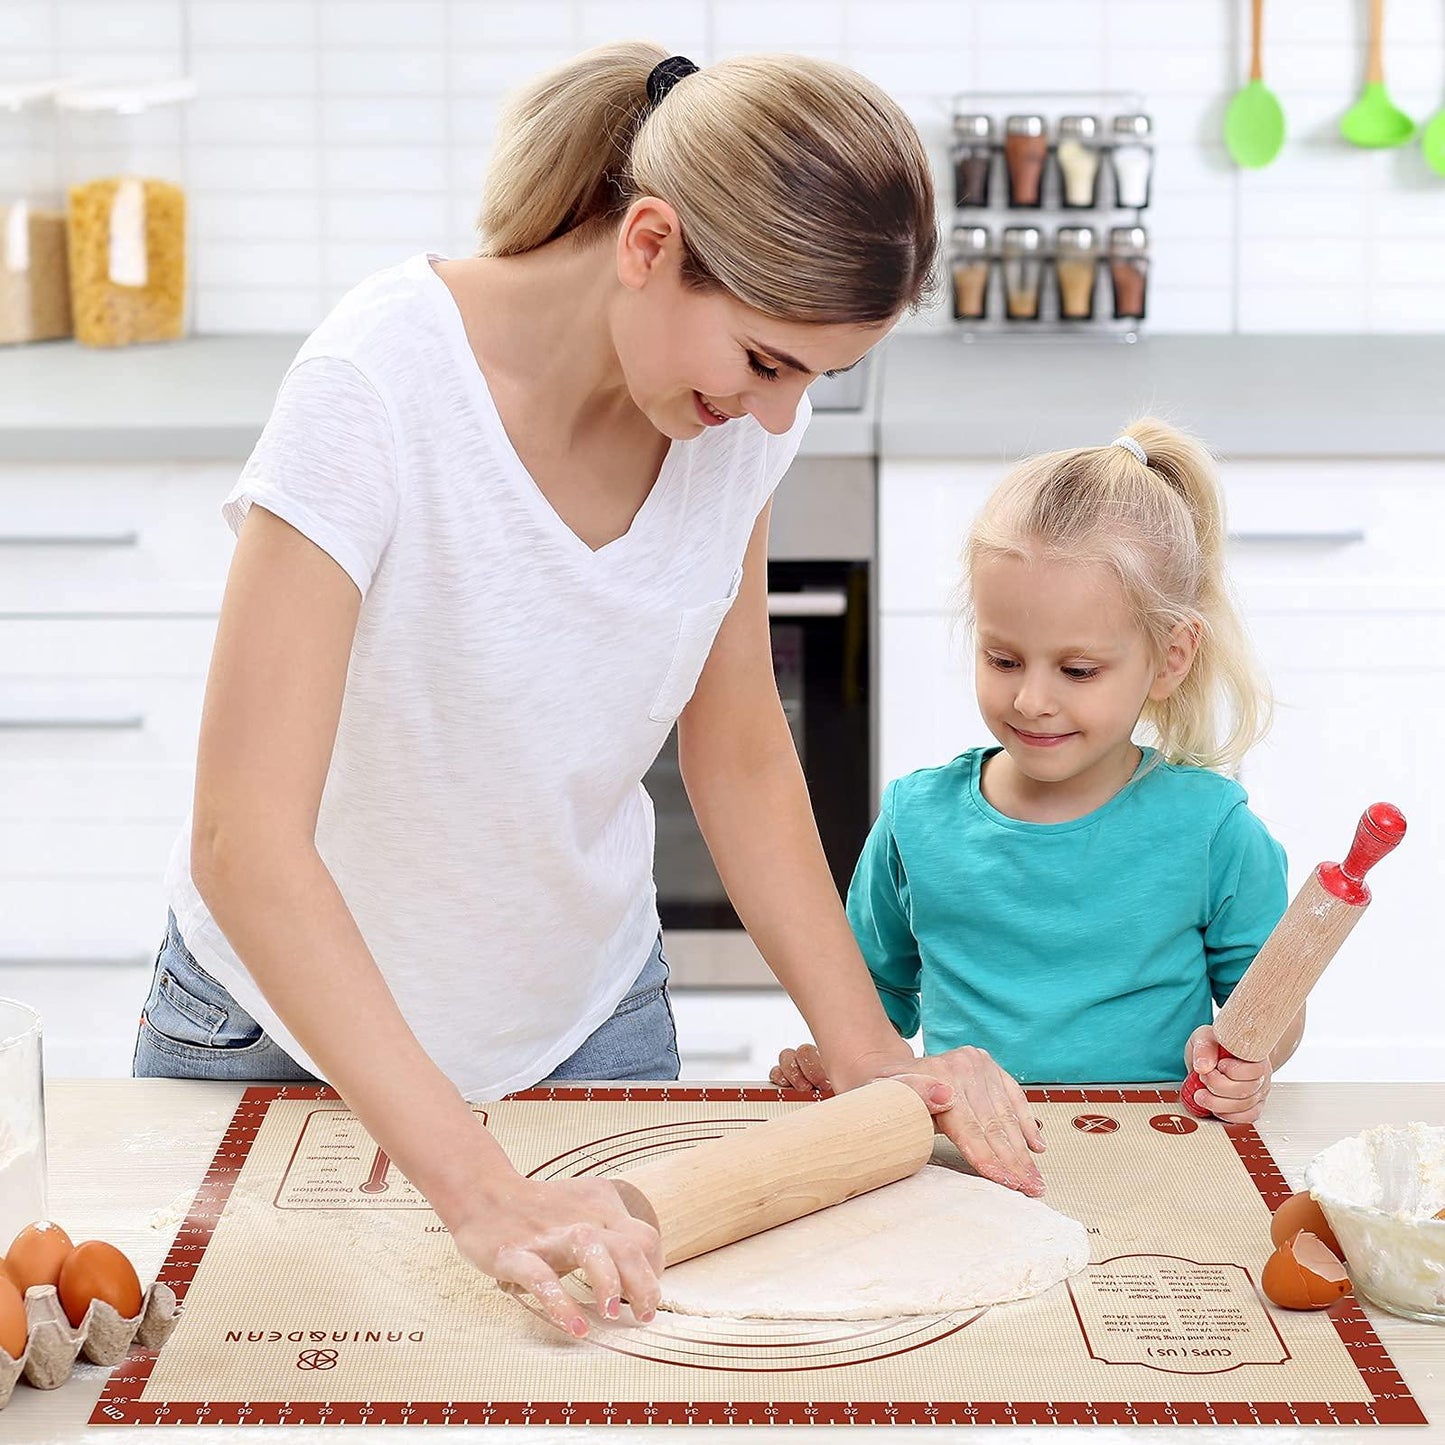 Non Stick 28''x20'' Extra Large Thick Silicone Pastry Mat, with measurements for Non-slip Silicone Baking Sheet, Counter Mat, Dough Rolling, Reusable Bakeware Mats for Cookies, Macarons, Bread, Pizza - CookCave